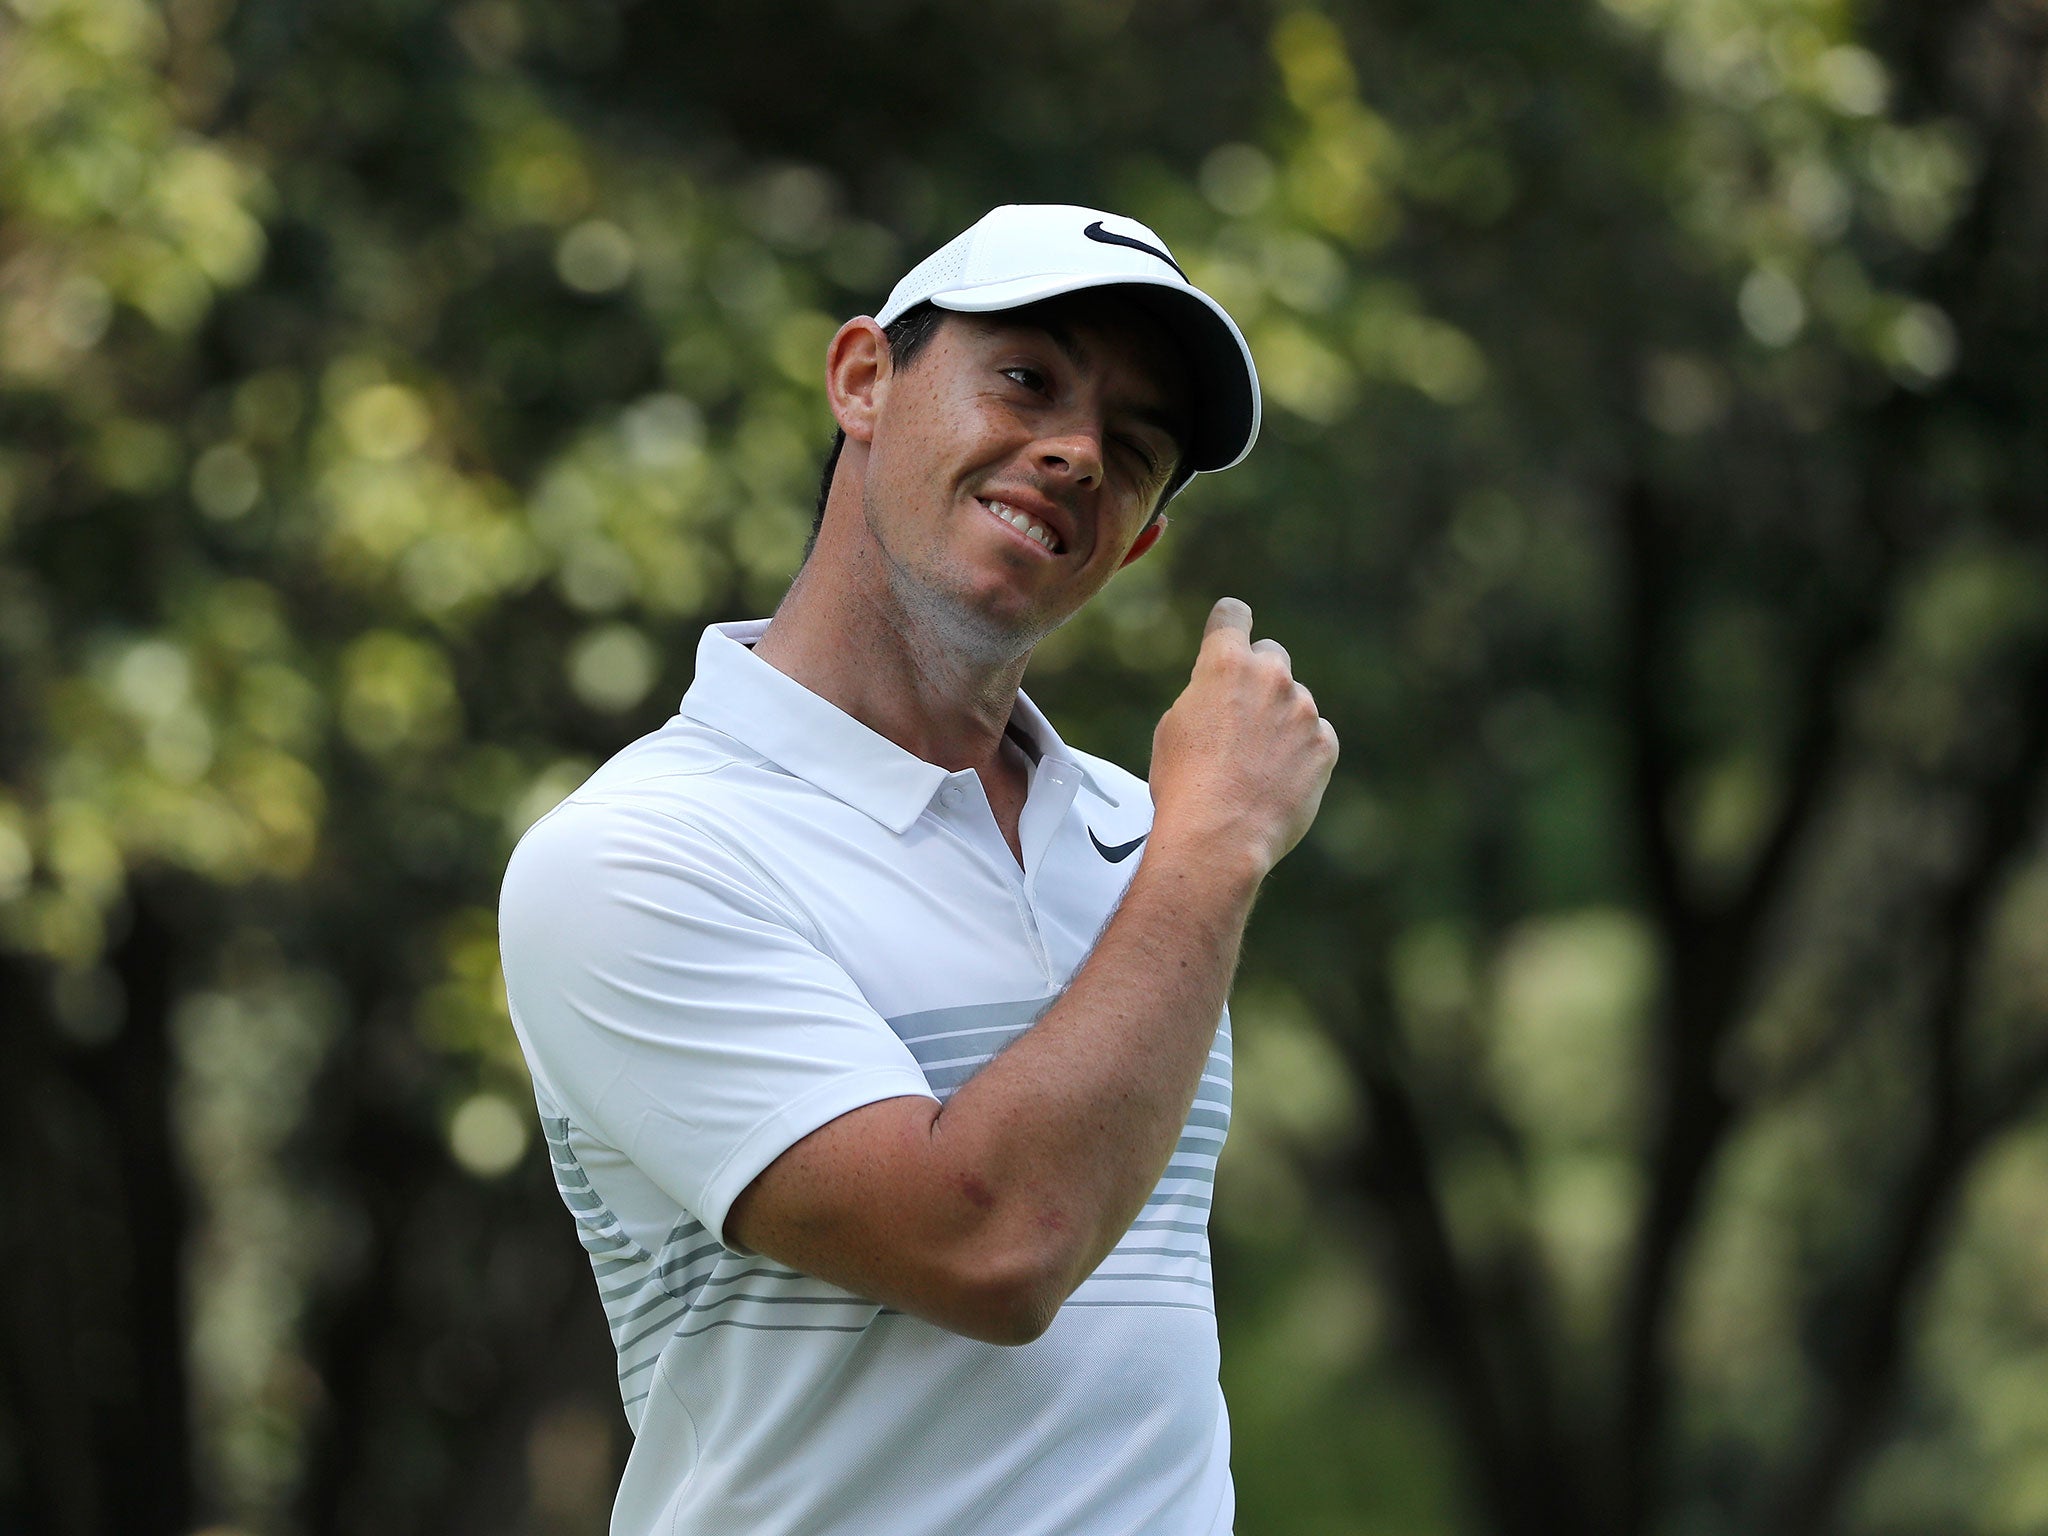 Rory McIlroy is one shot off the lead at the WGC Mexico Championship